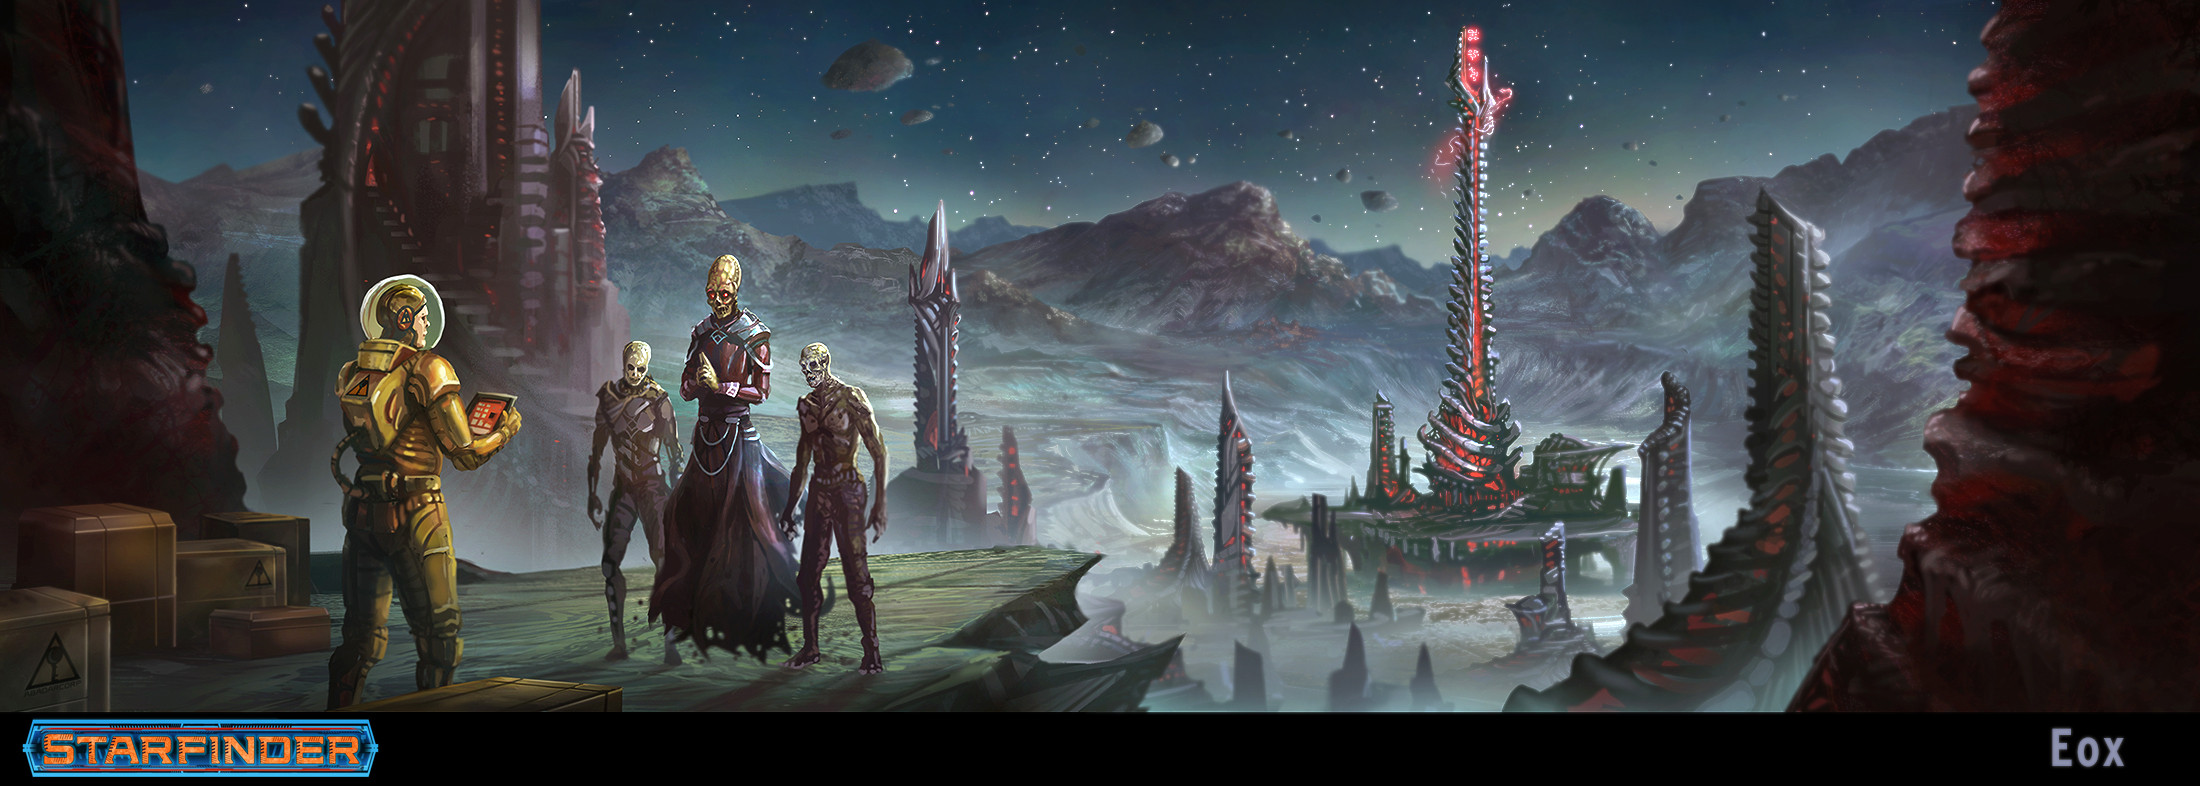 Eox spread for Pact Worlds book.